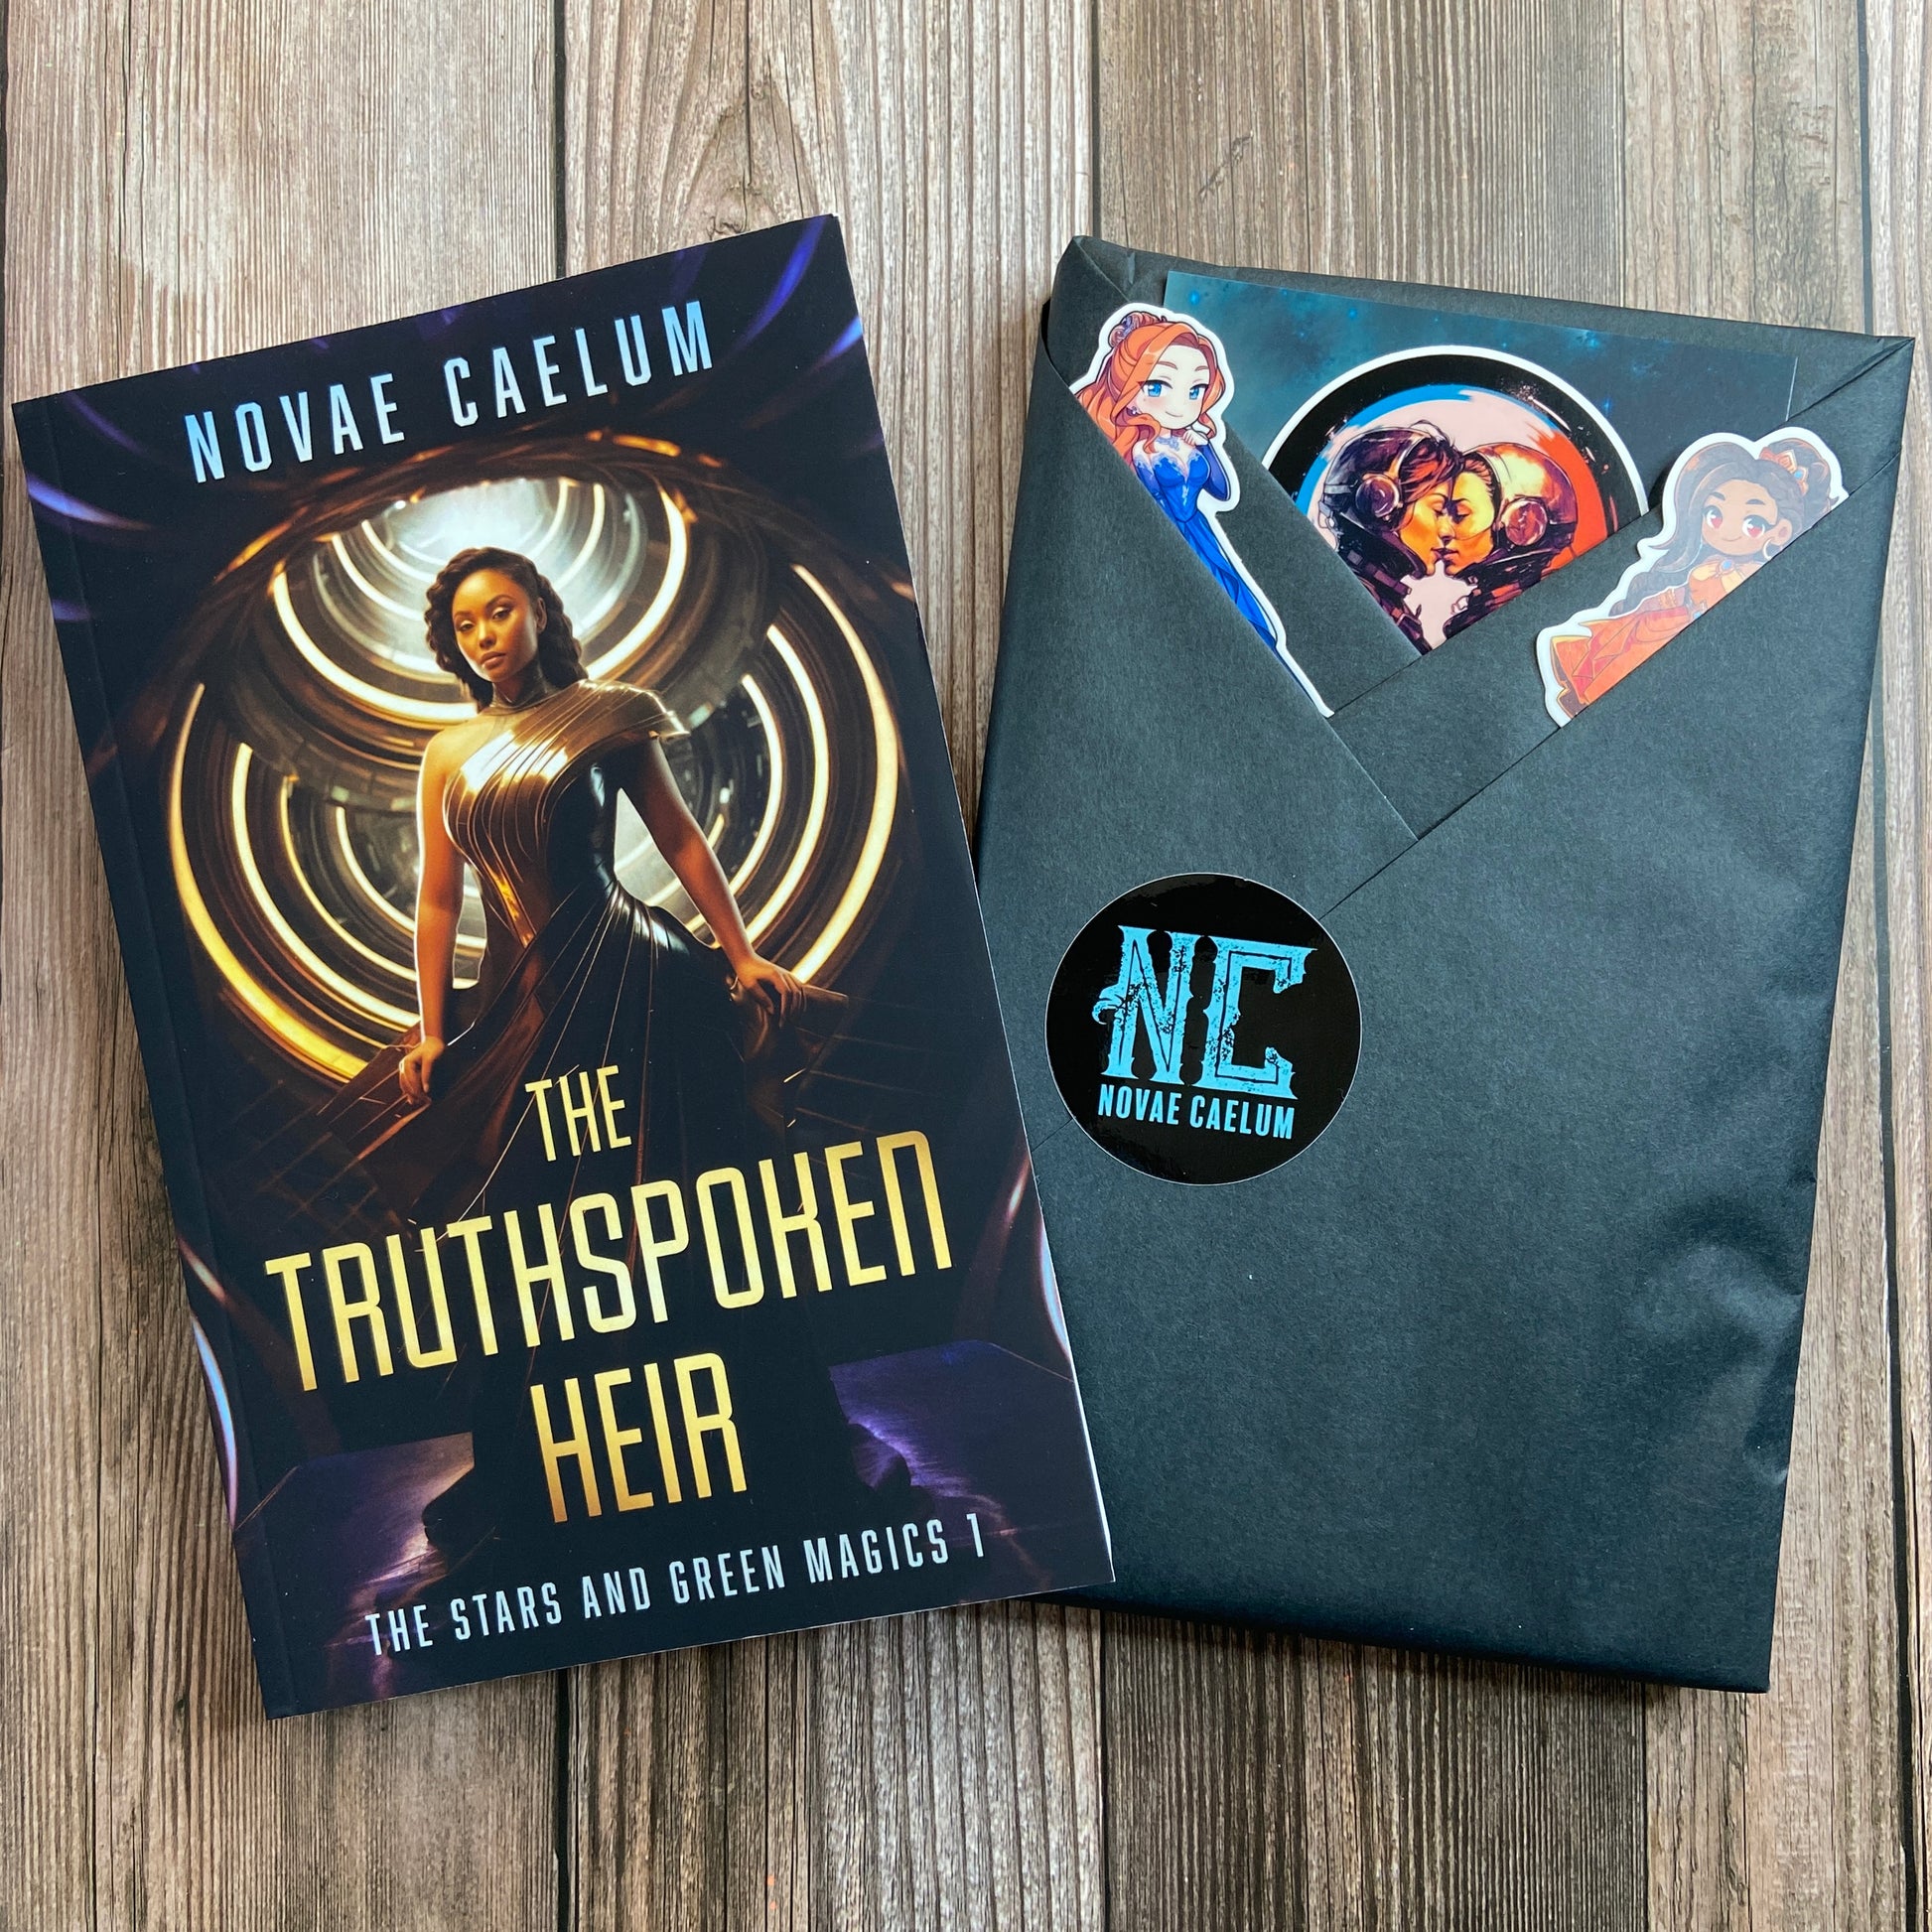 A paperback book titled "SIGNED The Truthspoken Heir: The Stars and Green Magics Book 1" by Novae Caelum, exploring themes of forbidden love and shapeshifting powers, alongside an envelope with stickers featuring characters from the book.